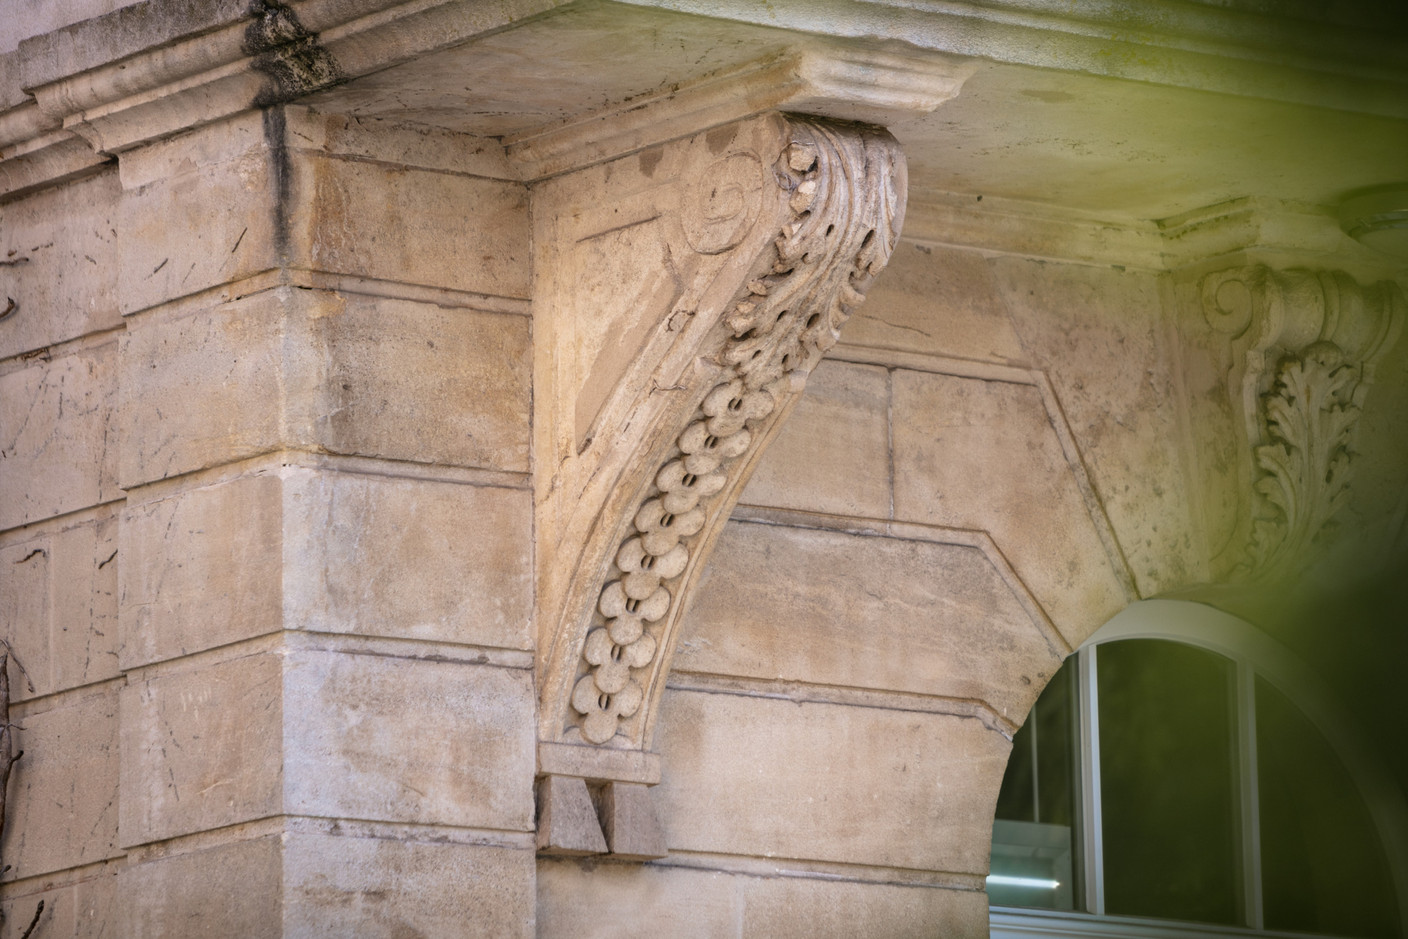 Stone carvings decorate the outside Romain Gamba / Maison Moderne